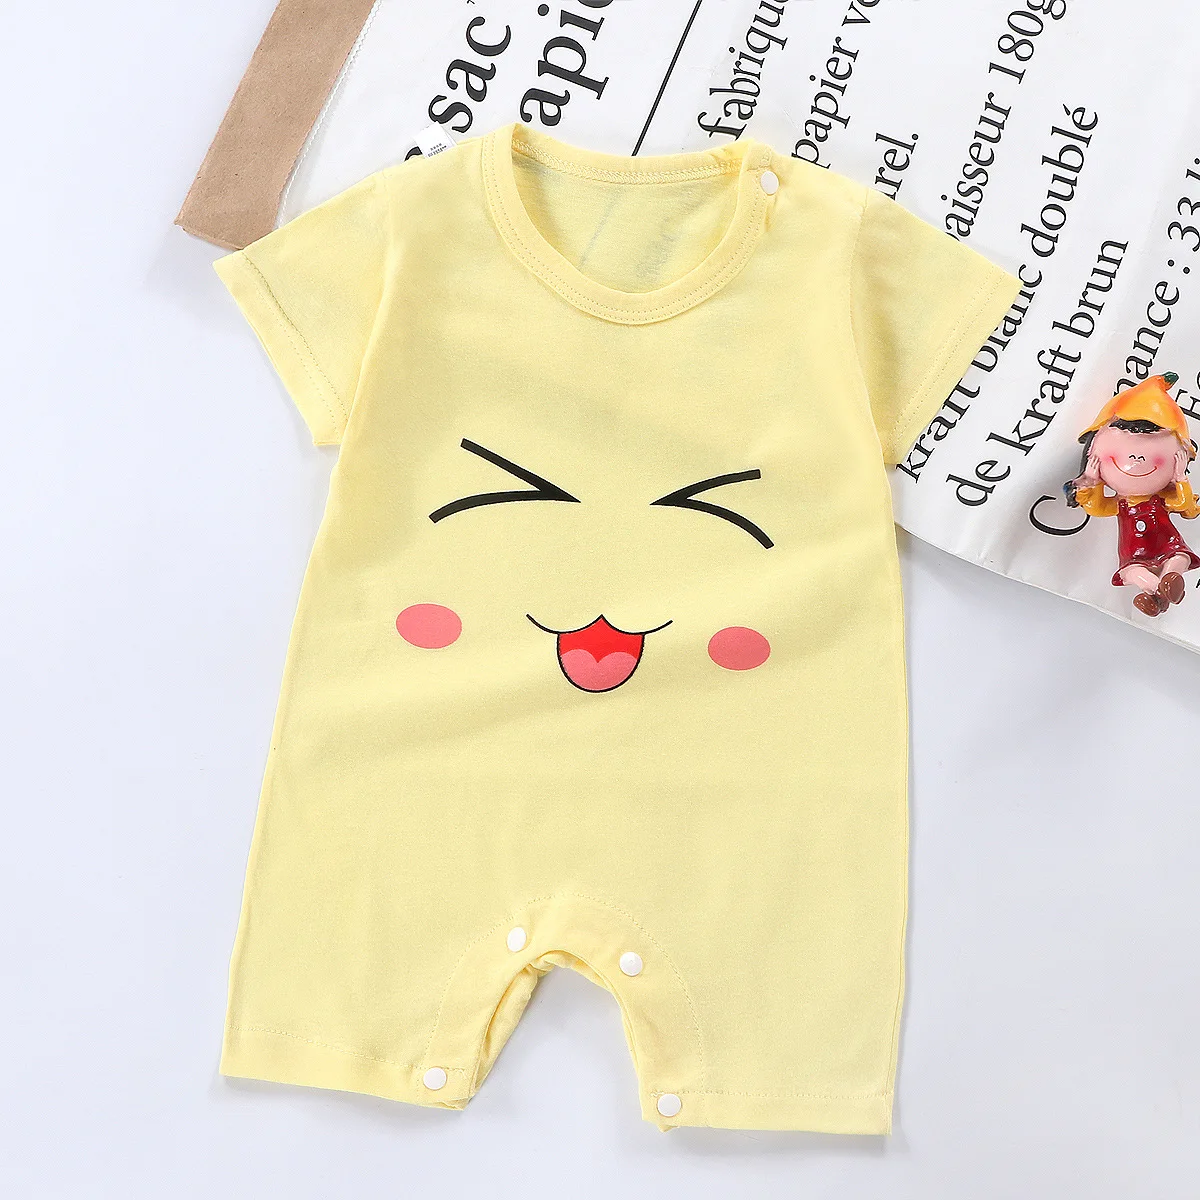 Newborn Baby Boys Girls Cartoon Cotton Kids Rompers Summer Children Infant Body Short Sleeve Girl Jumpsuit Printed Baby Clothes cheap baby bodysuits	 Baby Rompers